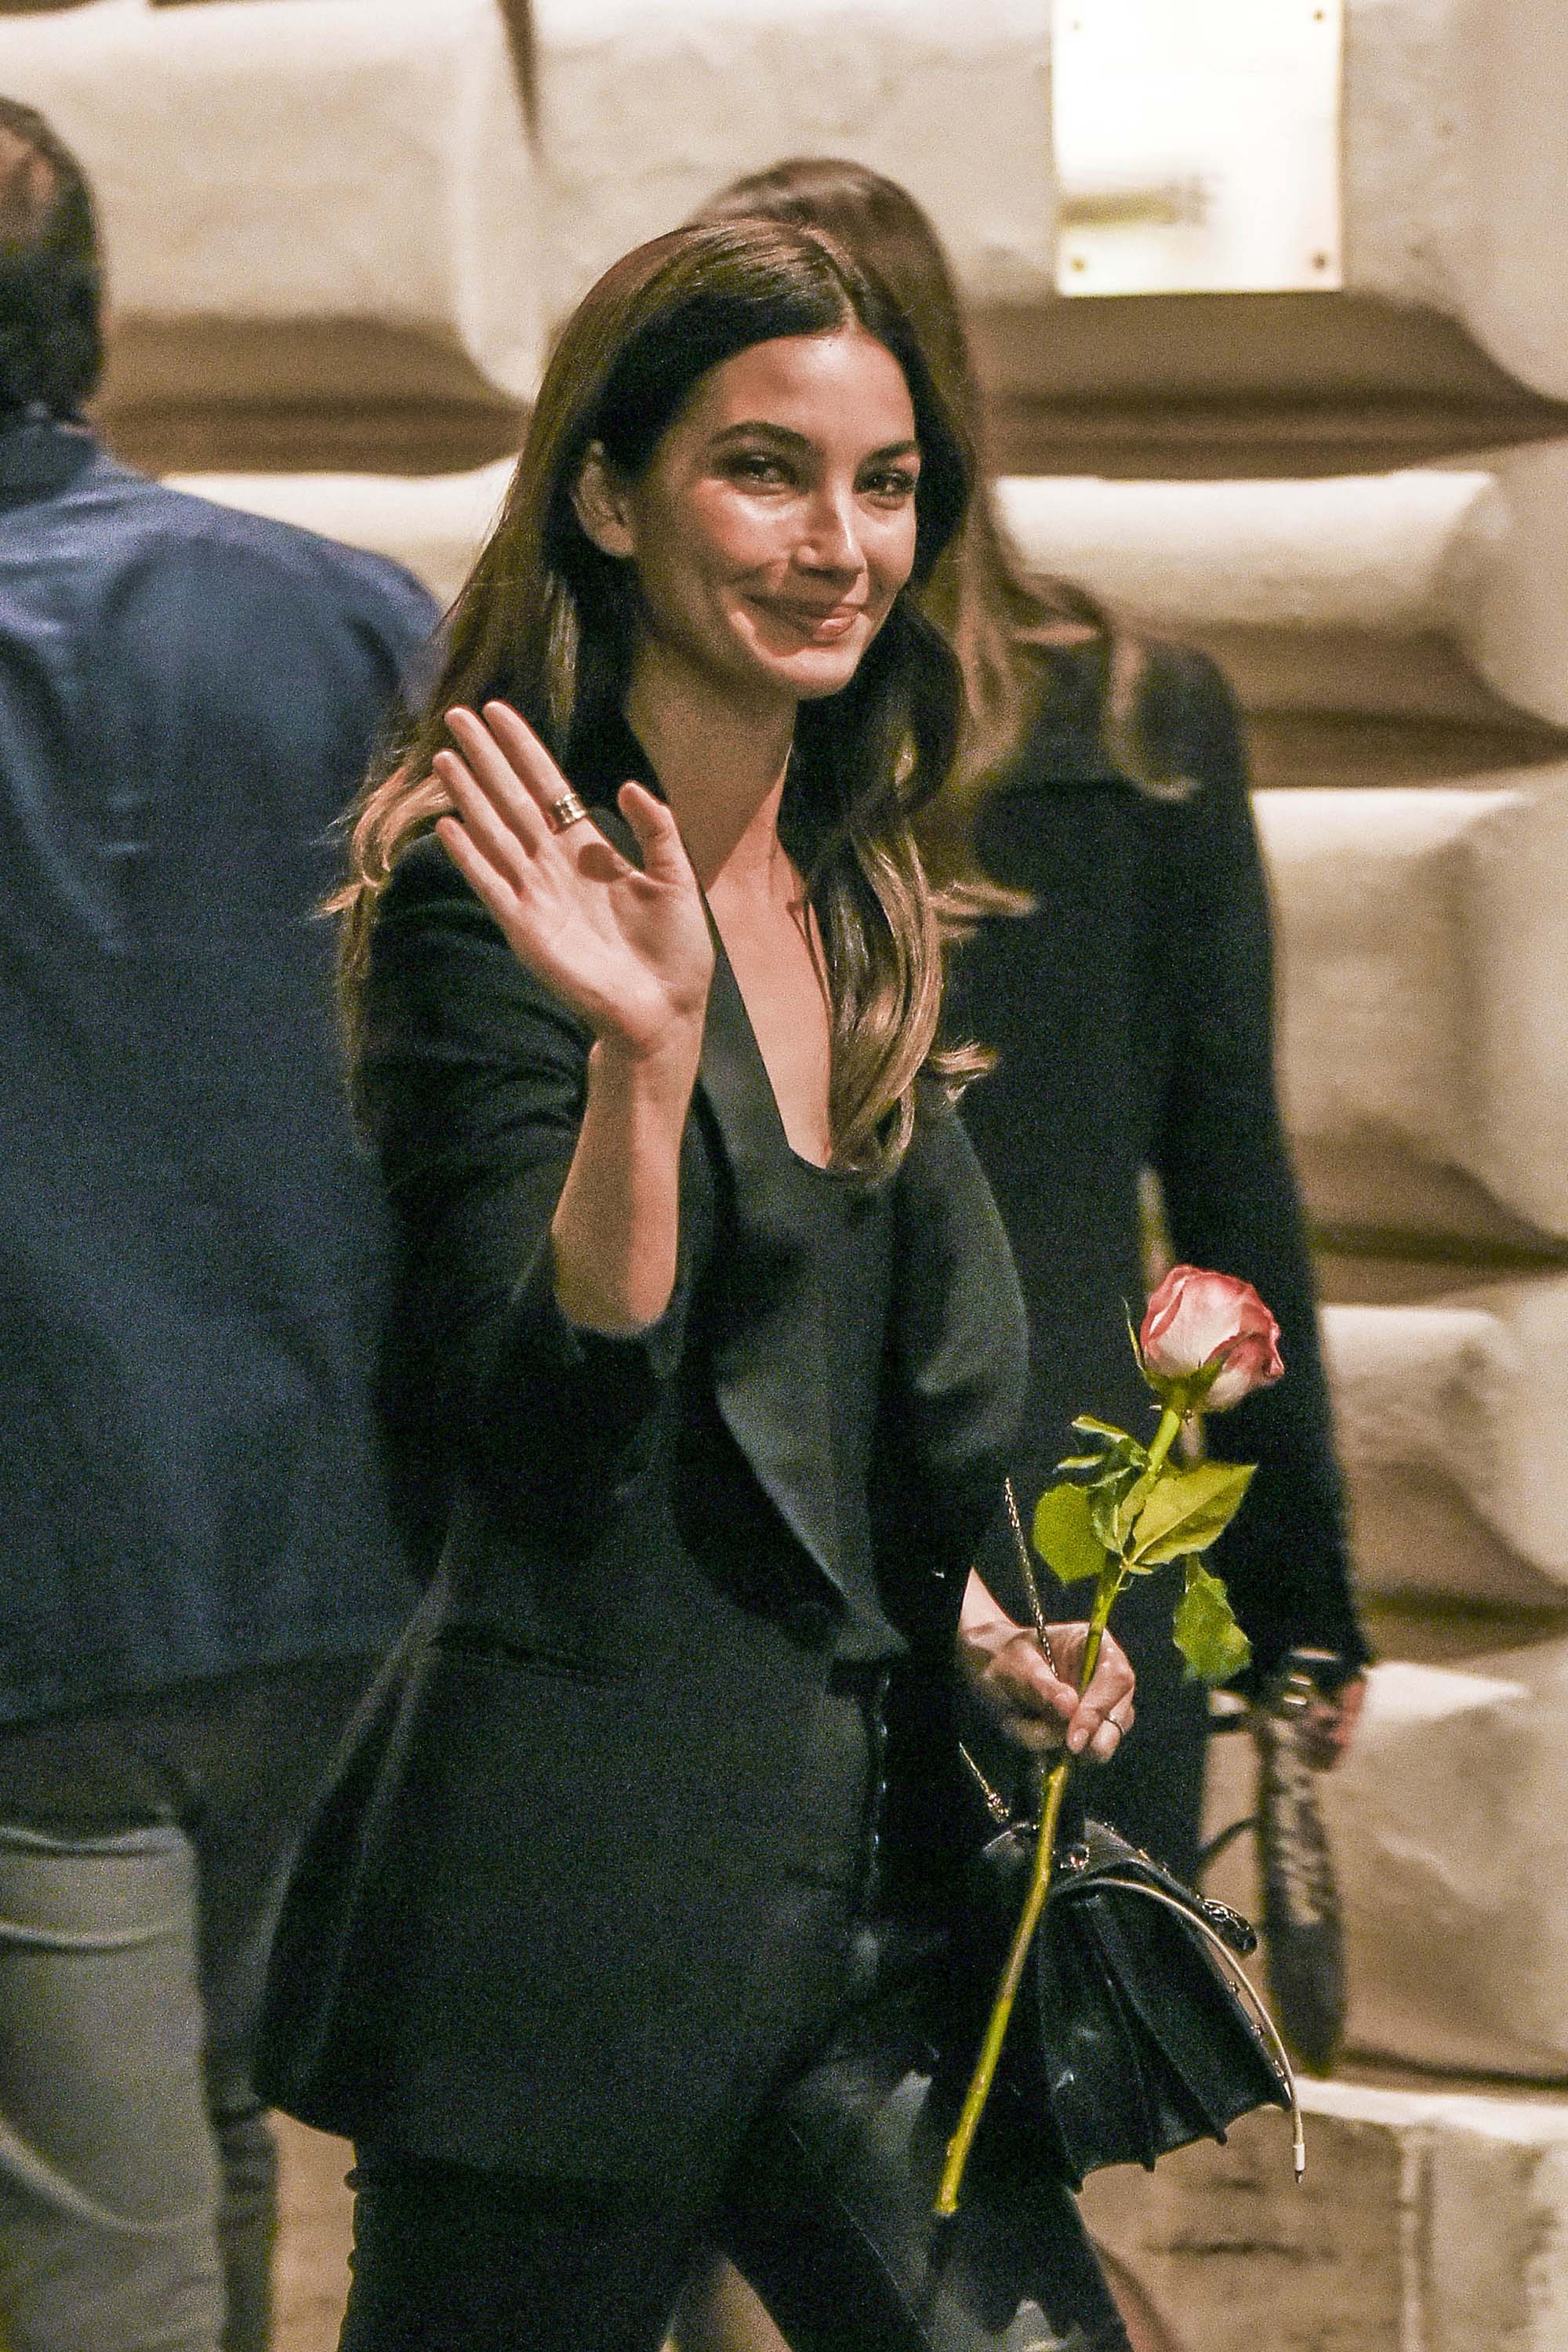 Lily Aldridge out in Rome